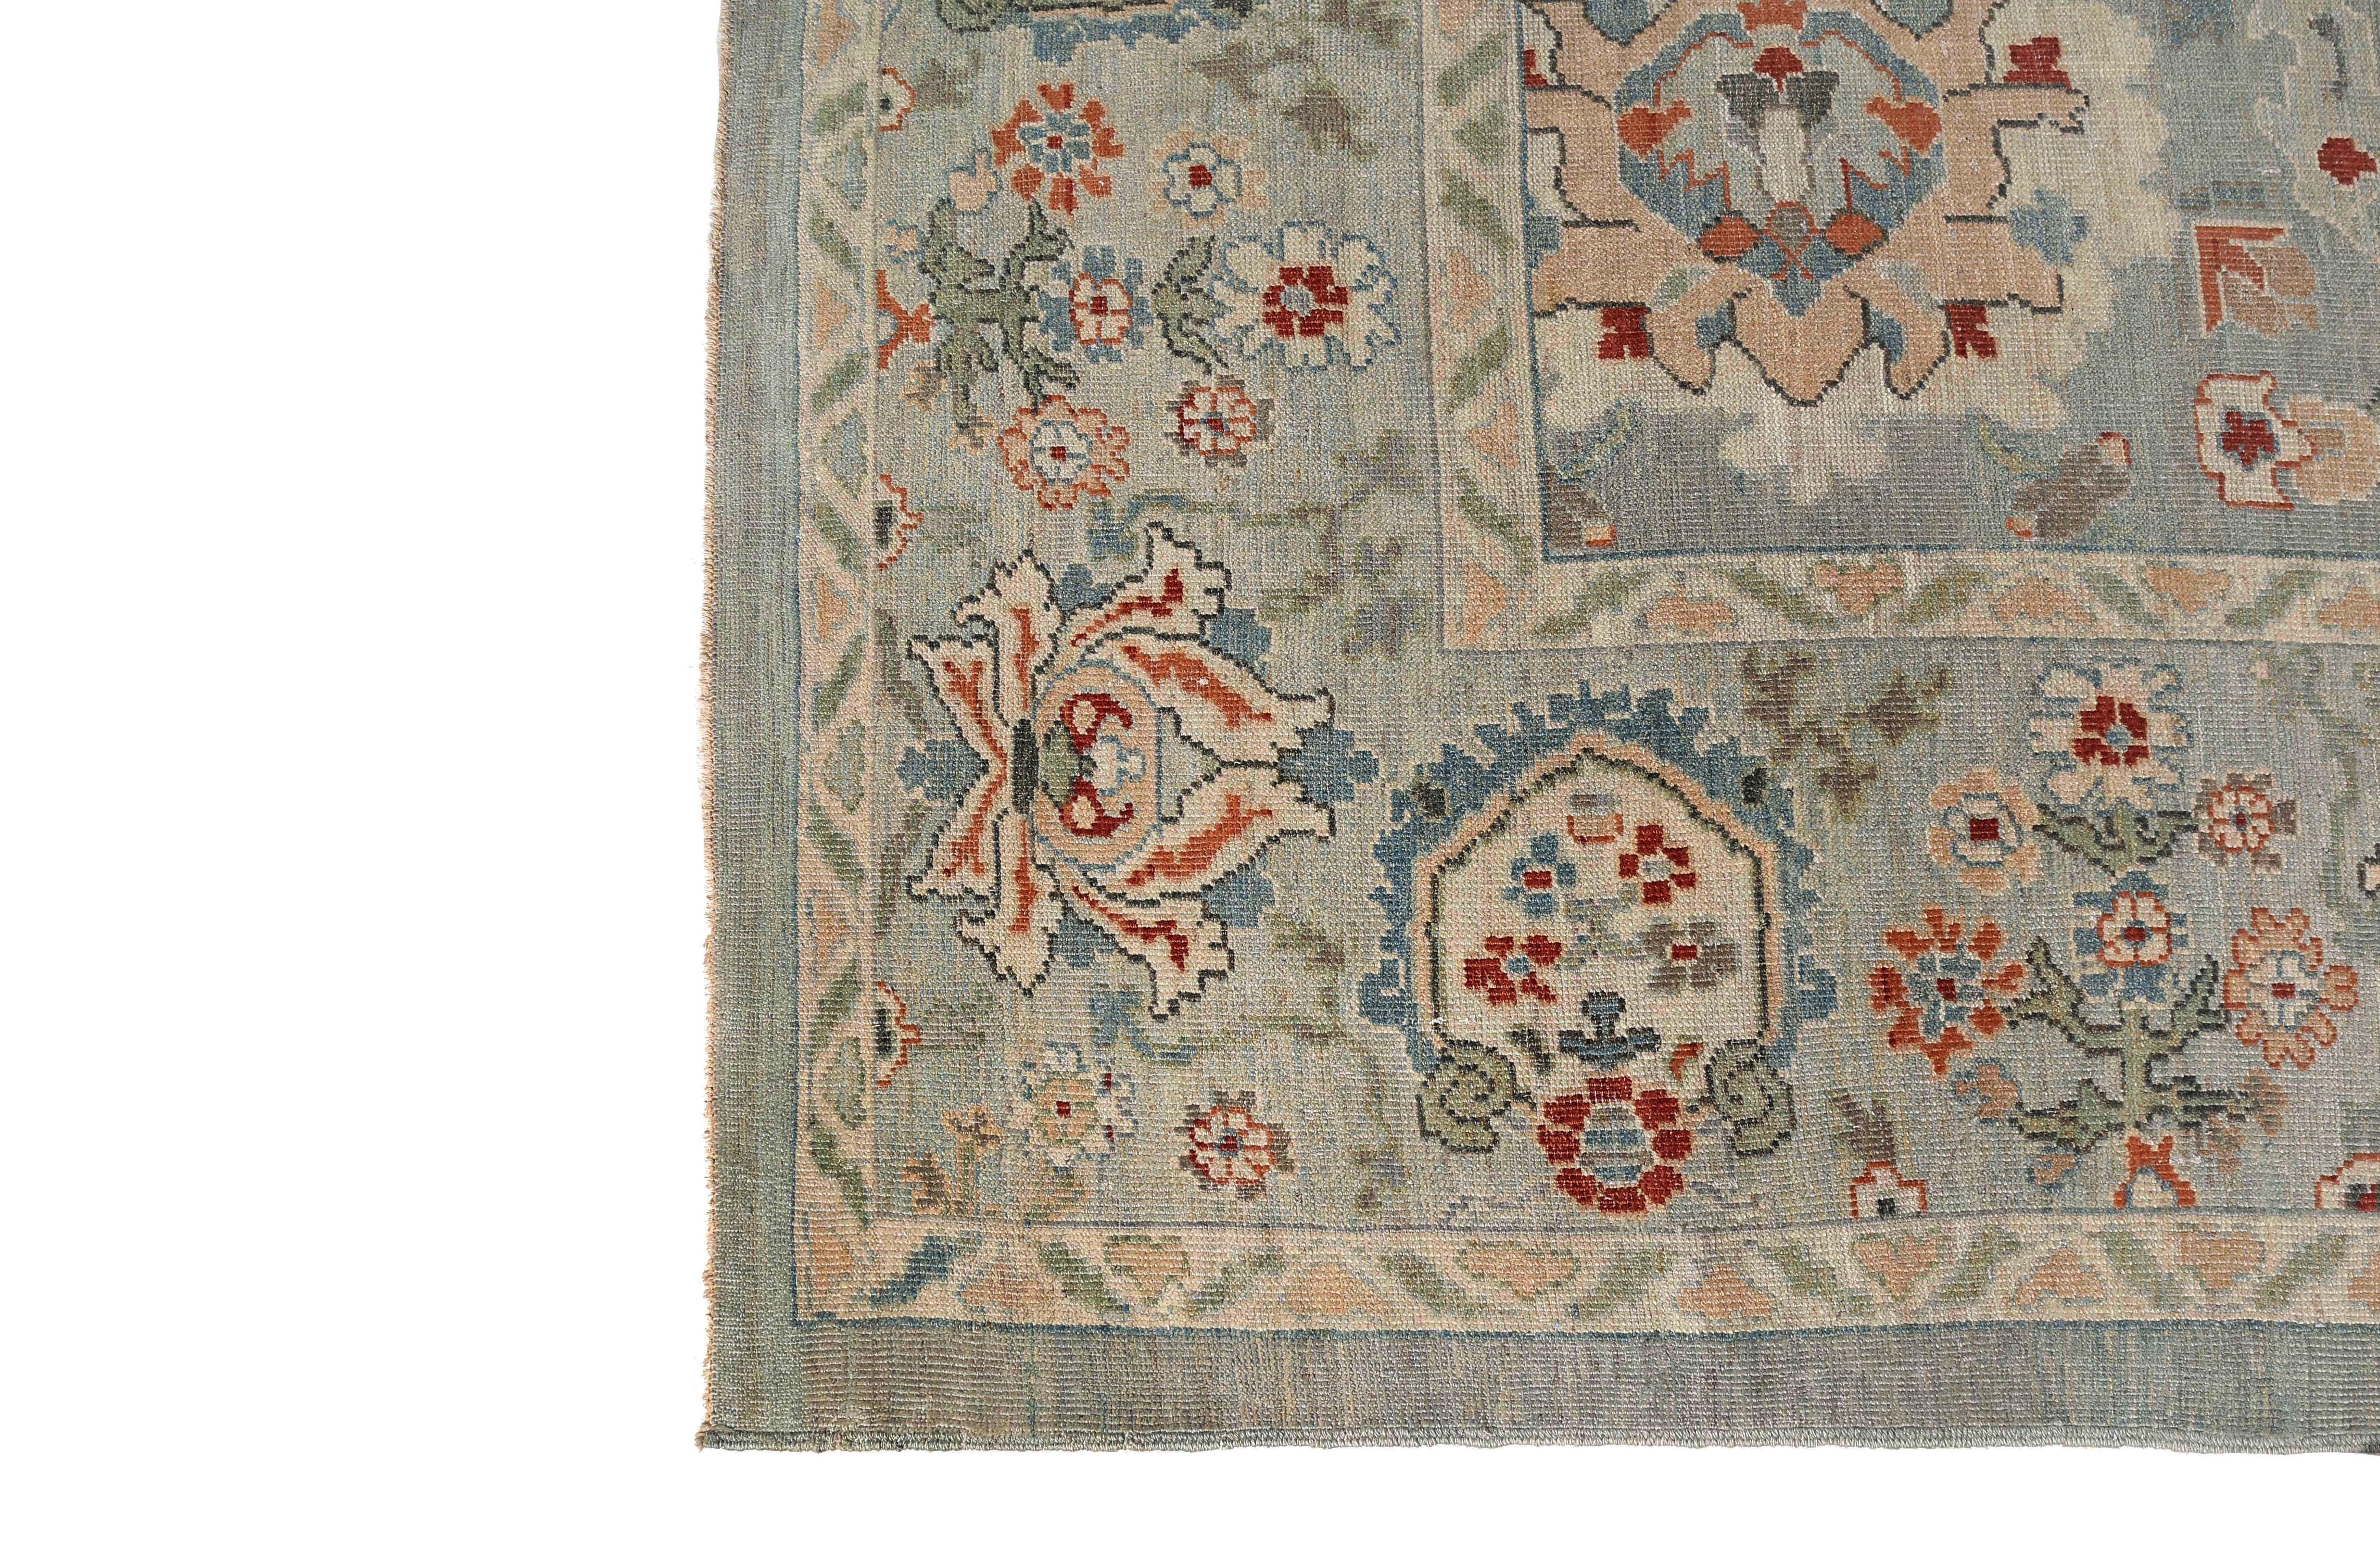 Introducing our exquisite handmade Sultanabad rug, measuring 10'2